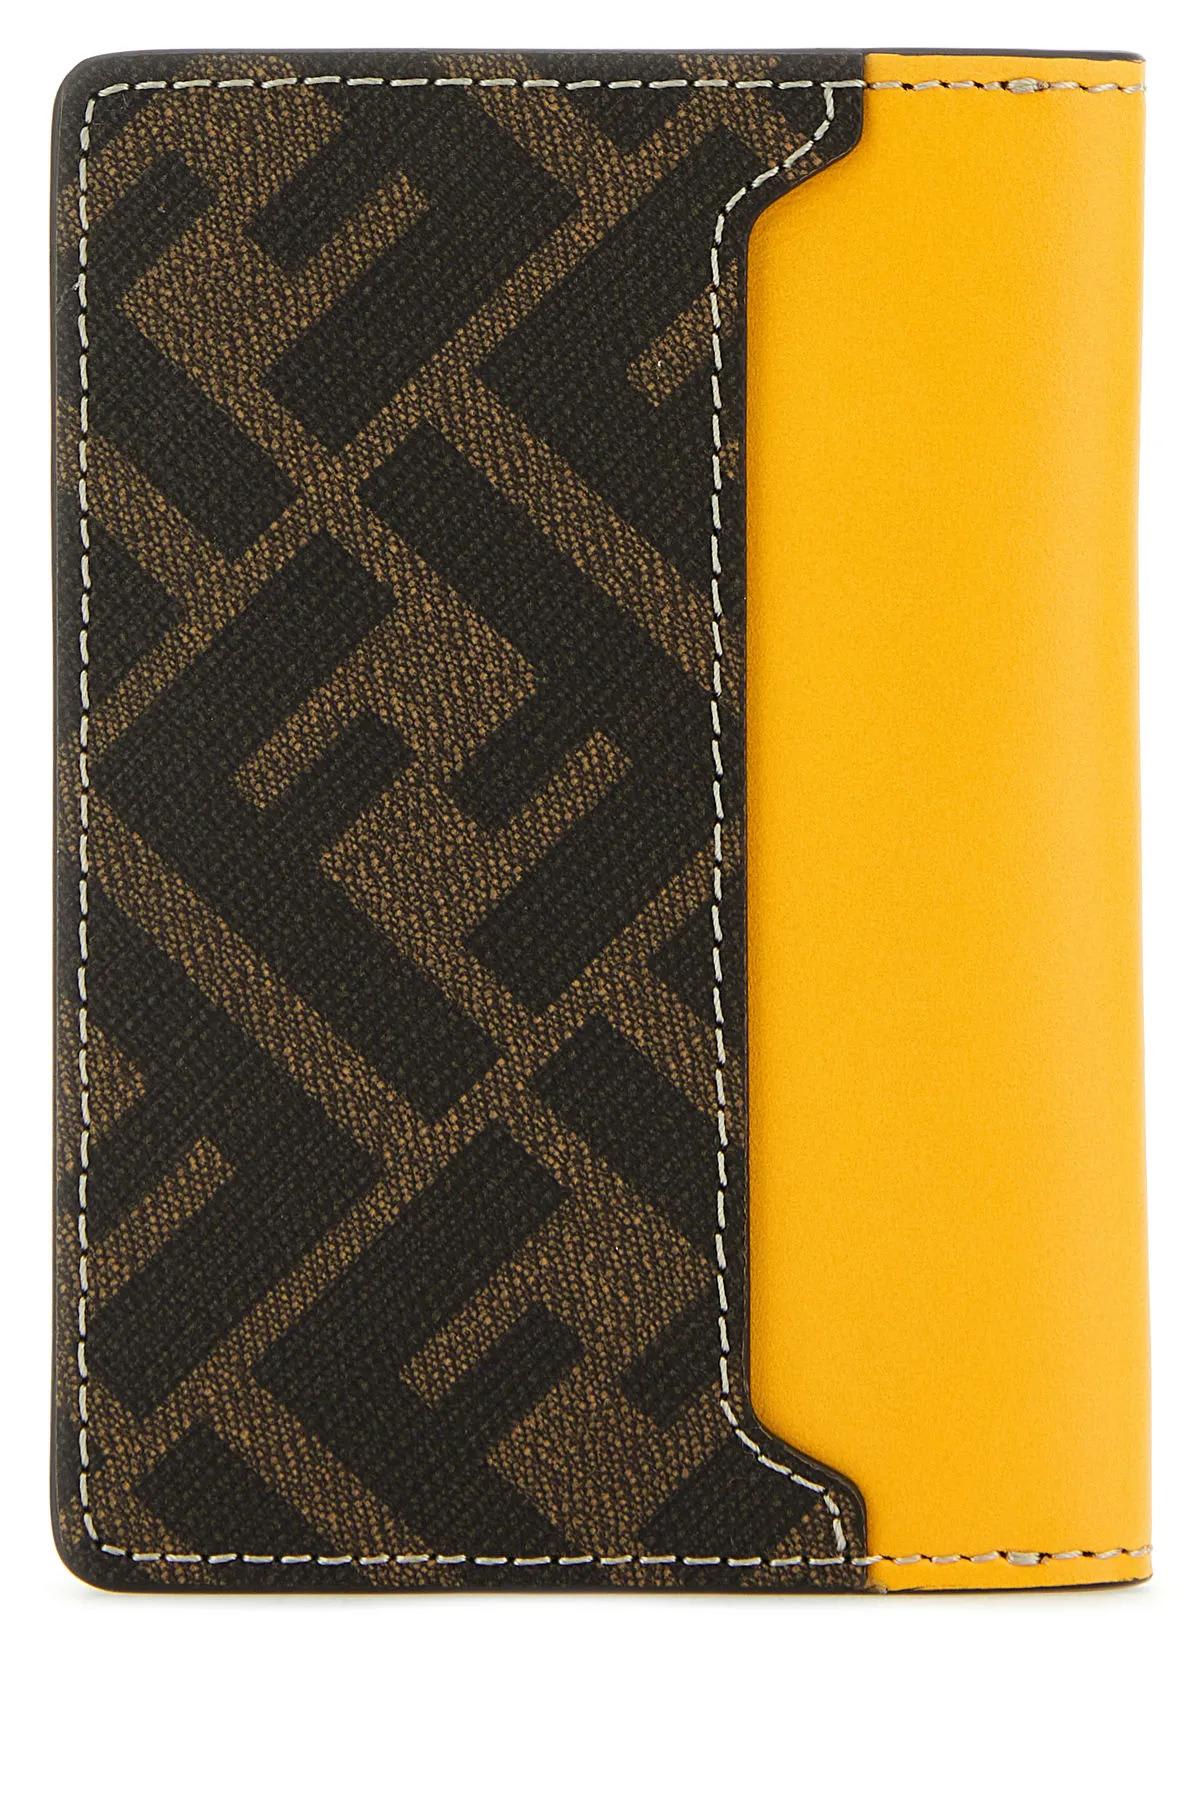 Fendi Yellow Leather Gusseted Card Holder — LSC INC